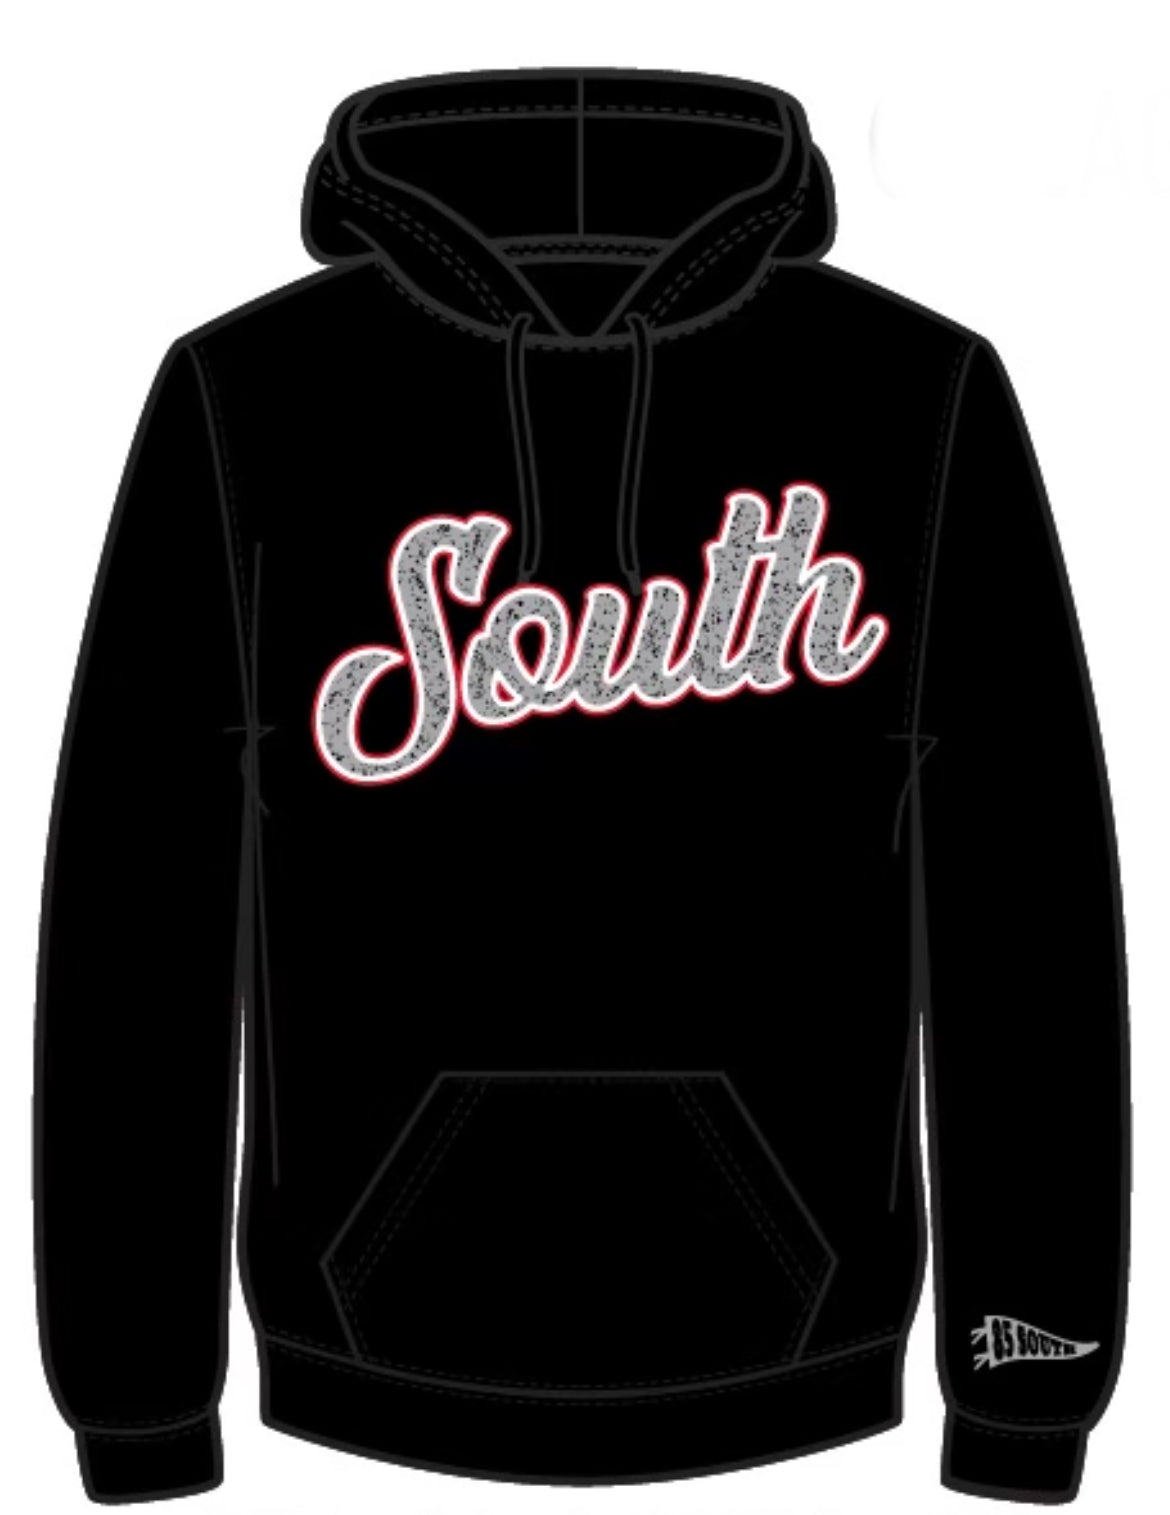 City Edition South Script Hoodie-Chicago